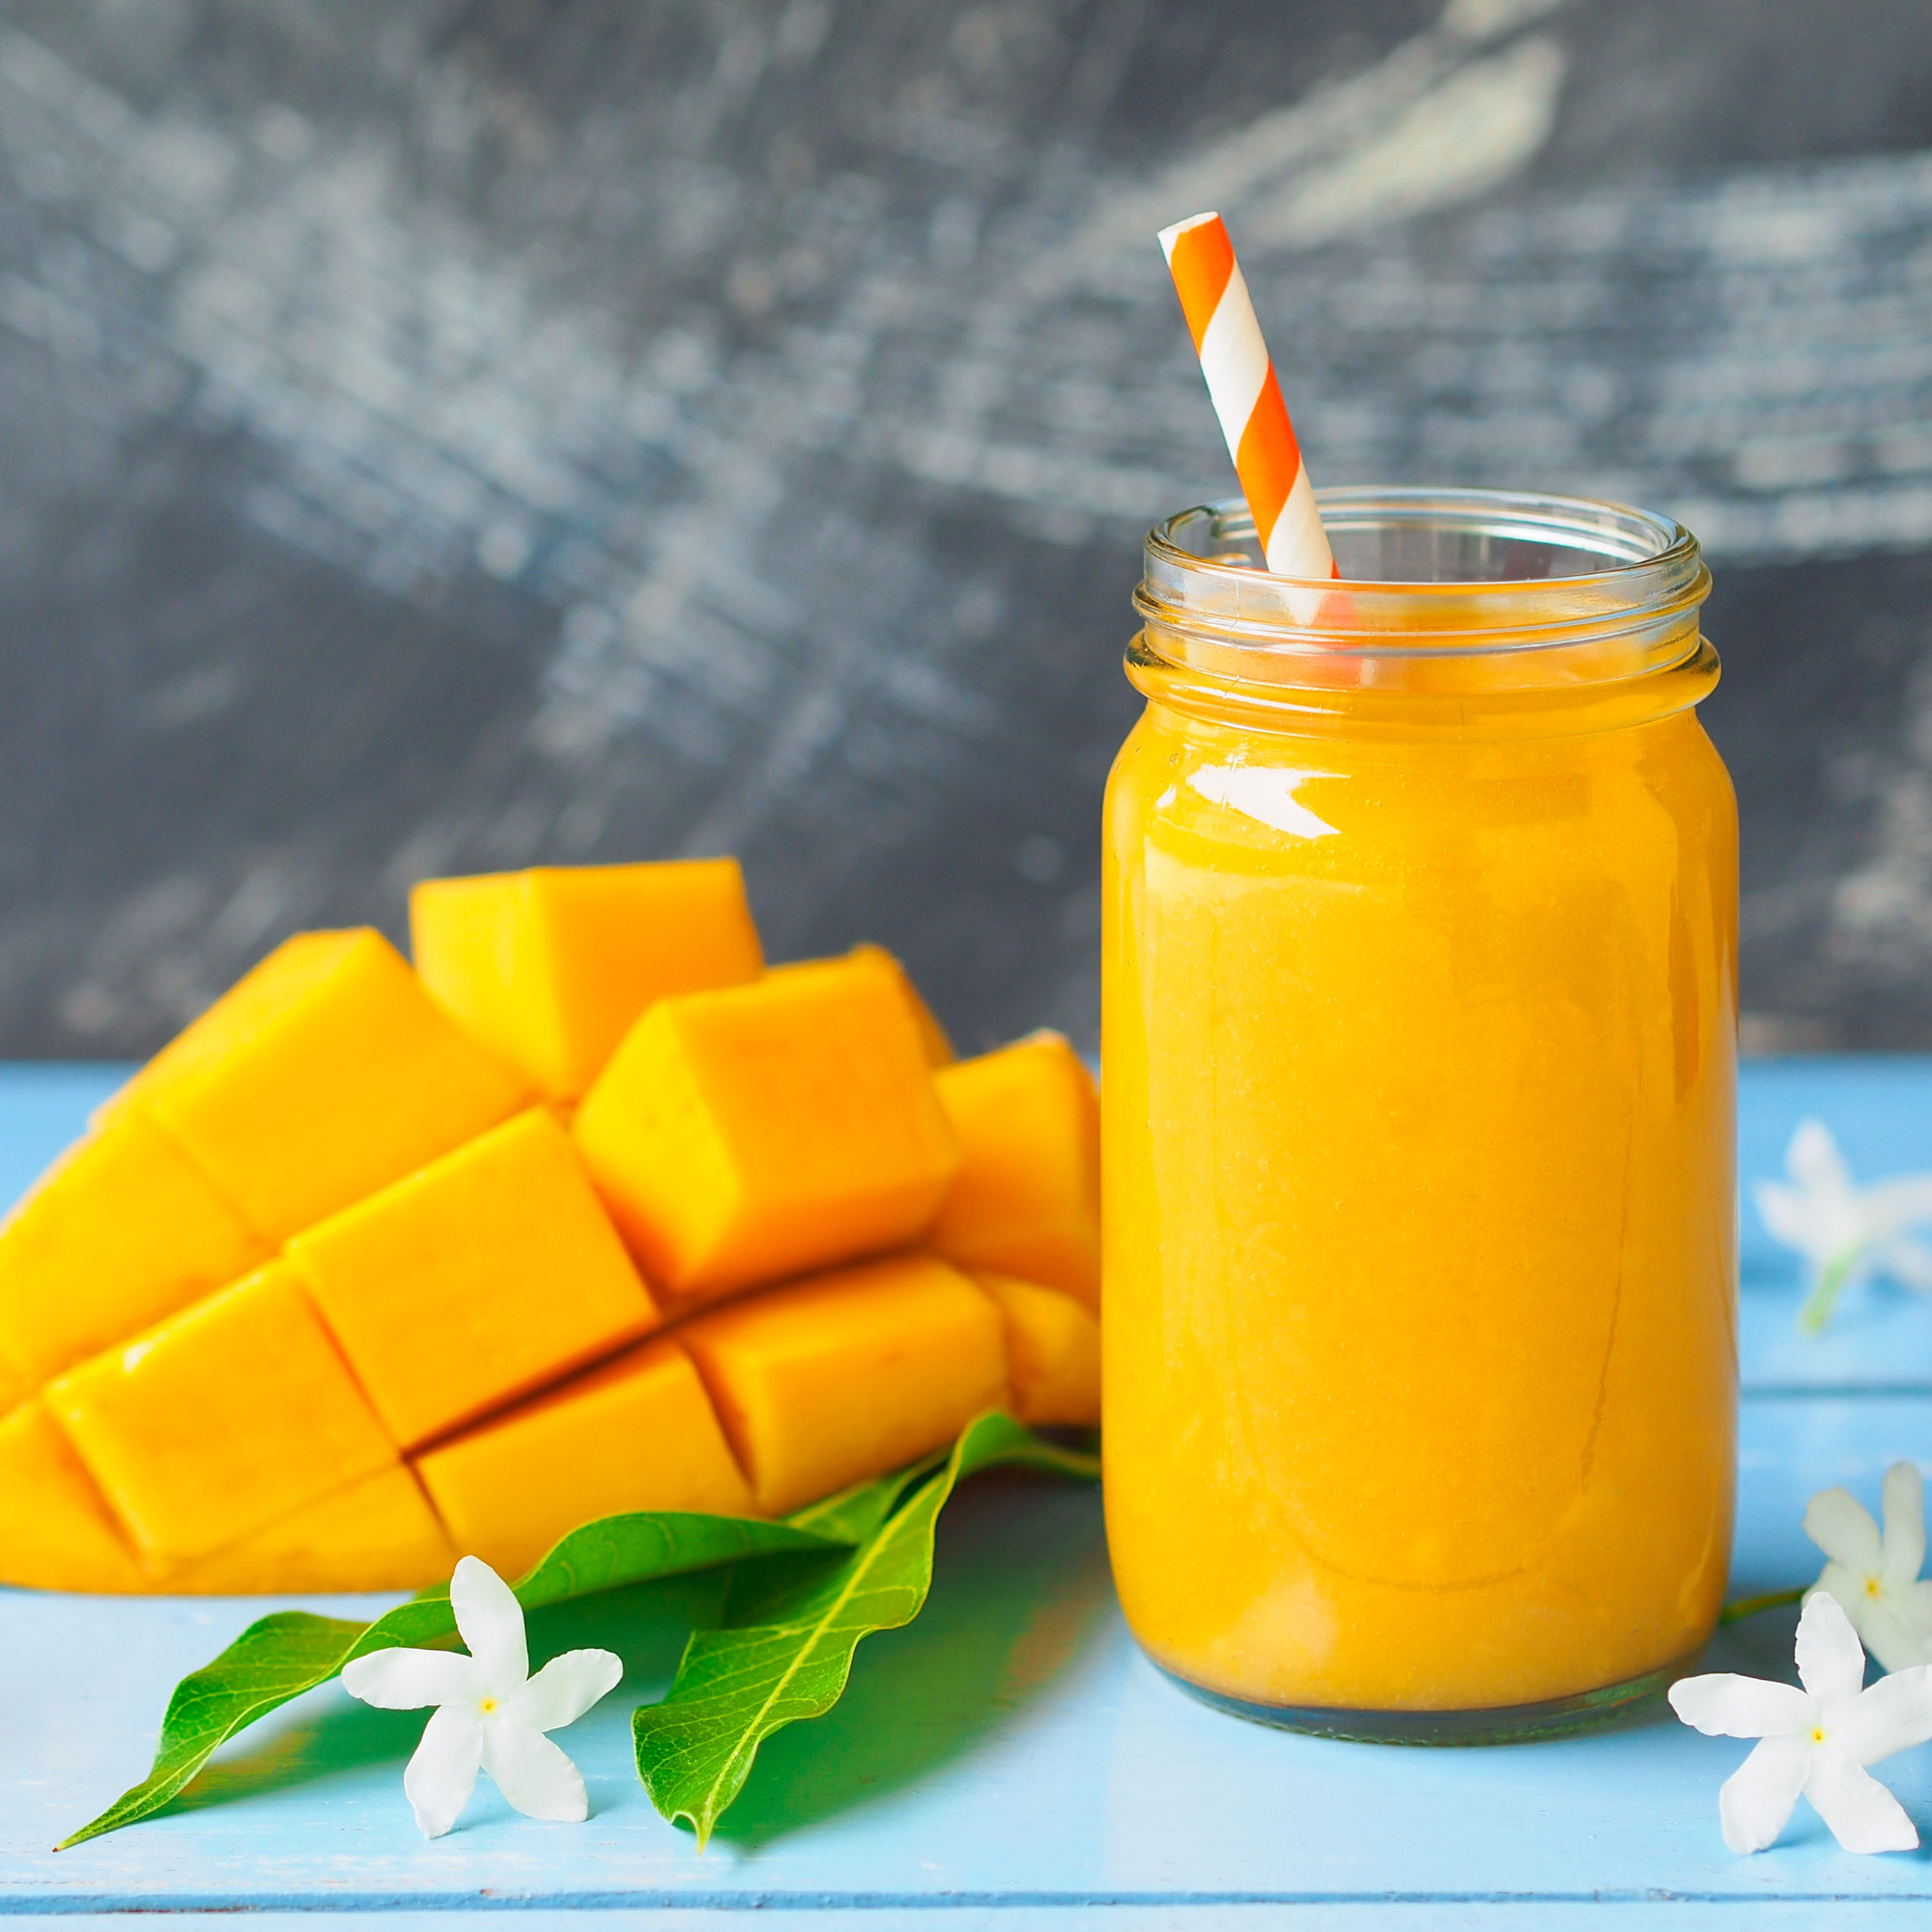 orange looking smoothie with a mango on the side with a straw